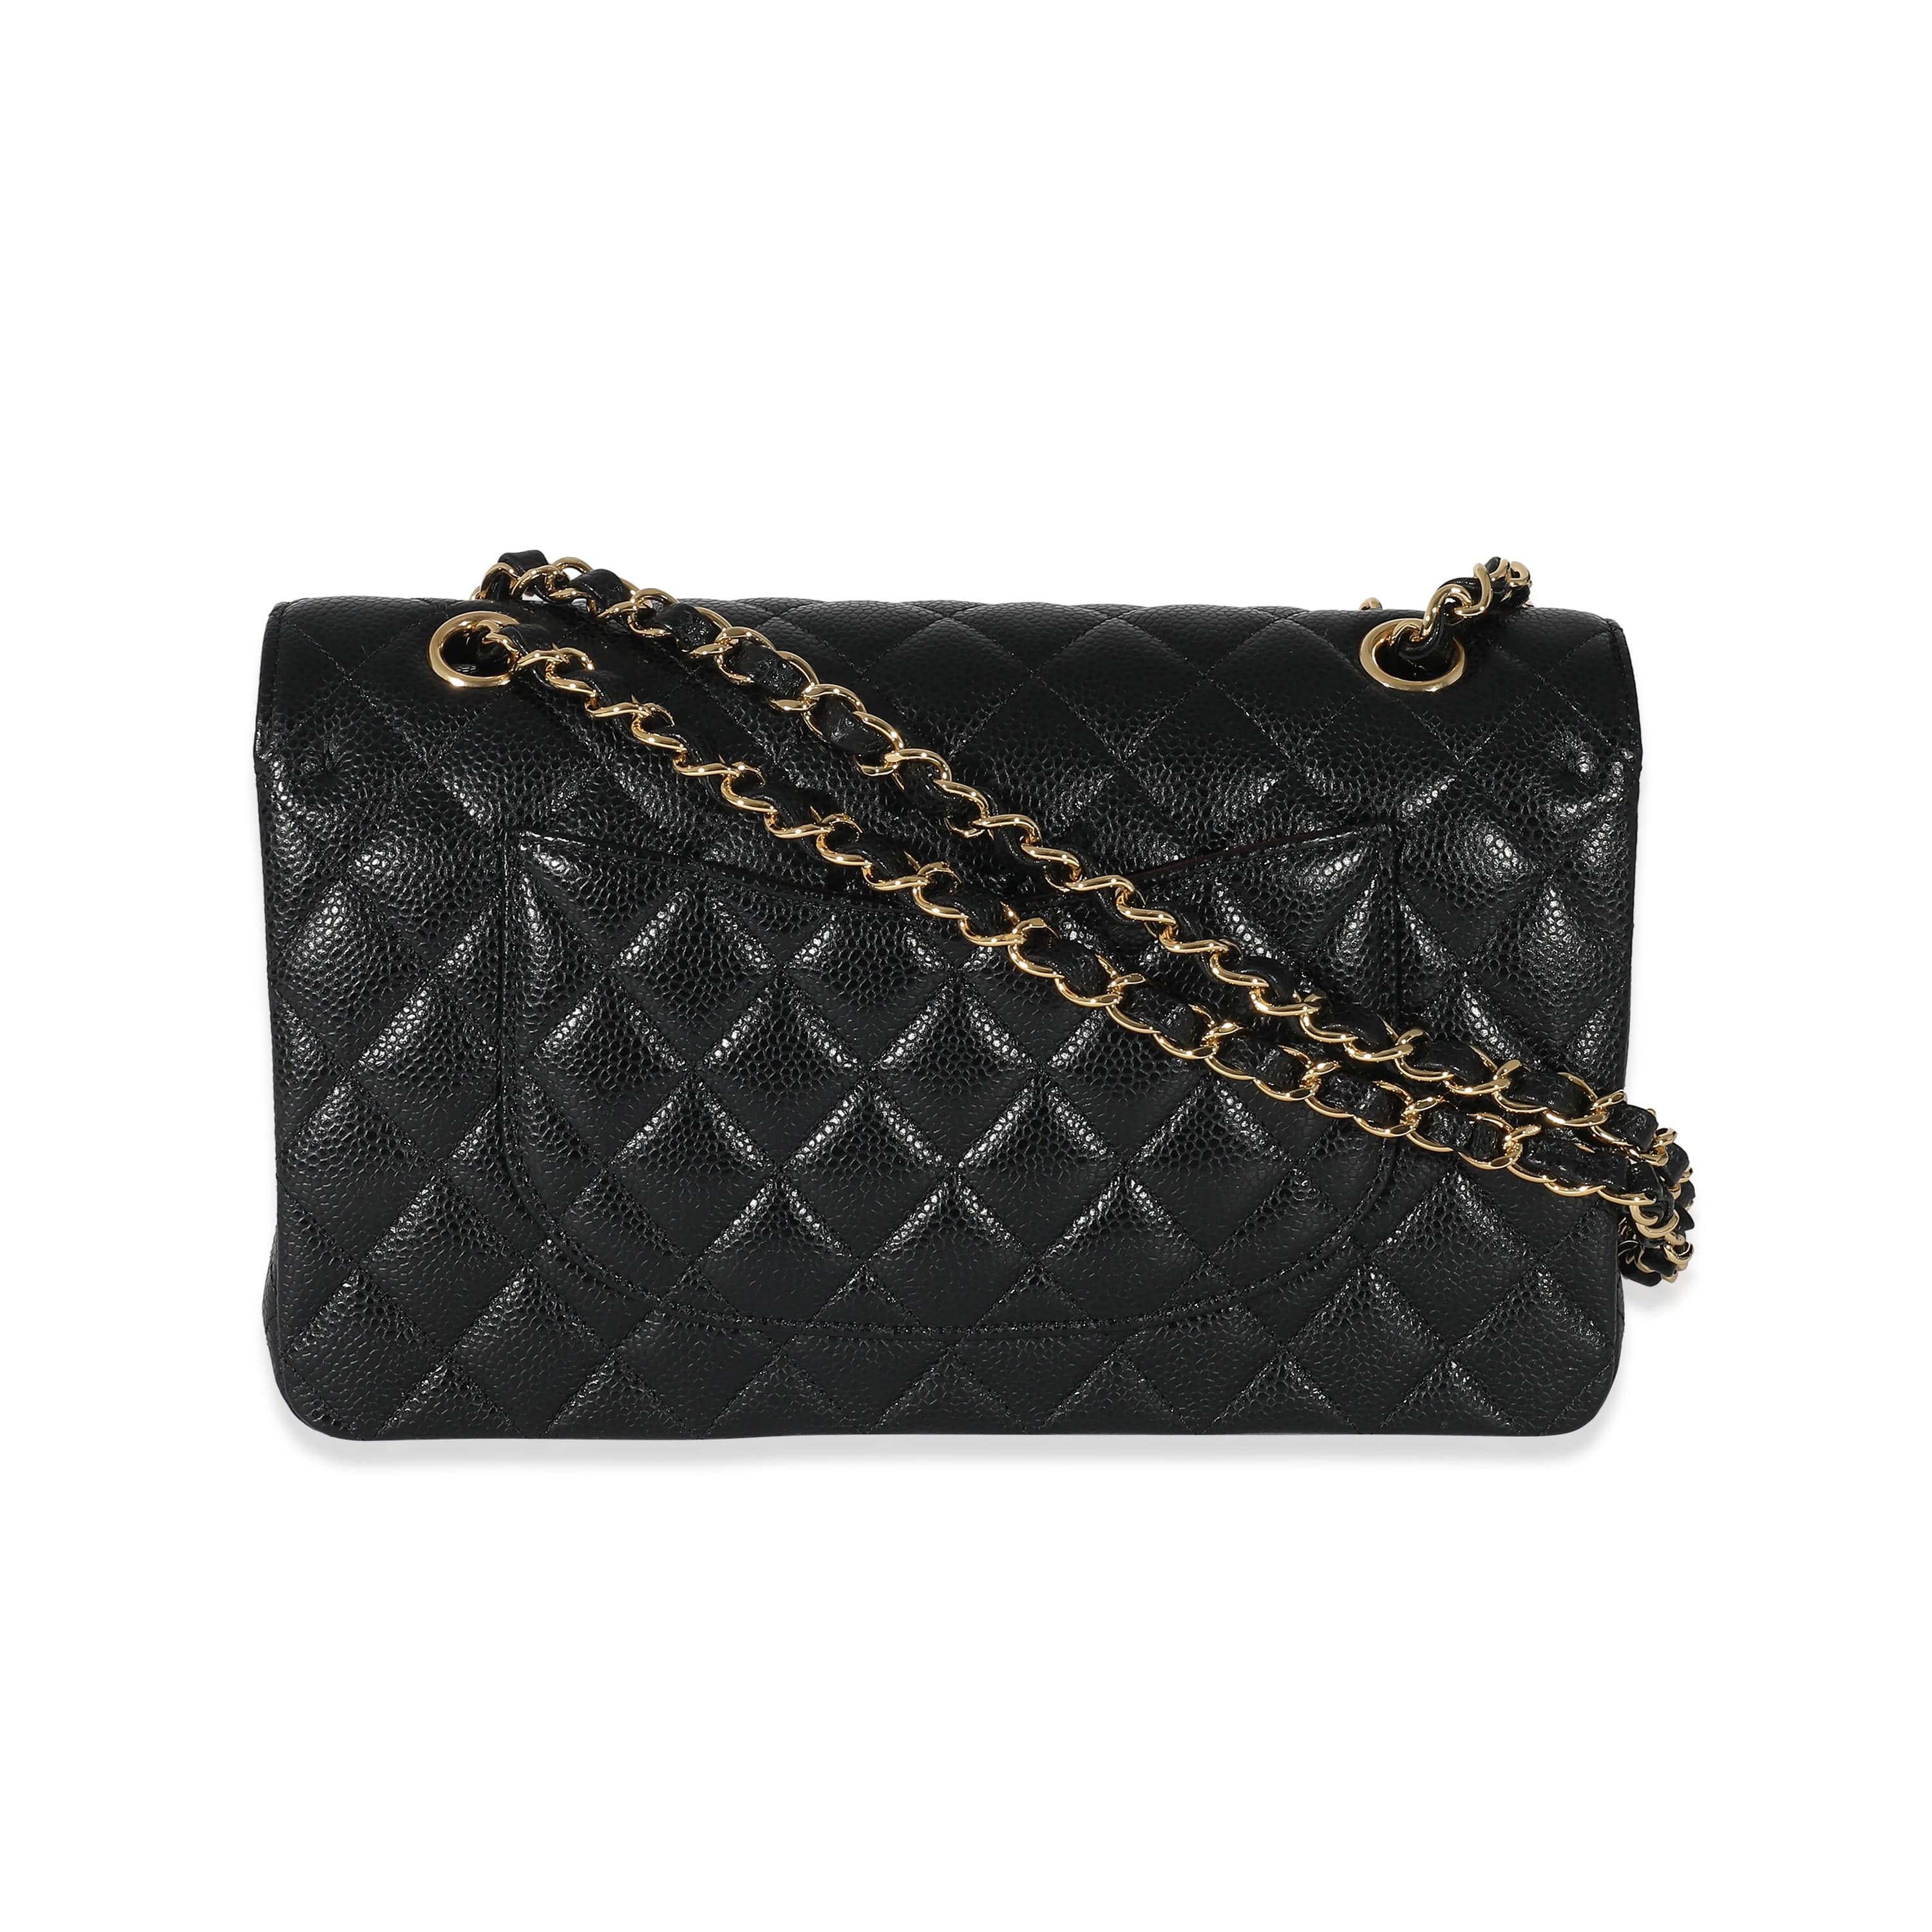 Chanel Chanel Black Quilted Caviar Medium Classic Double Flap Bag